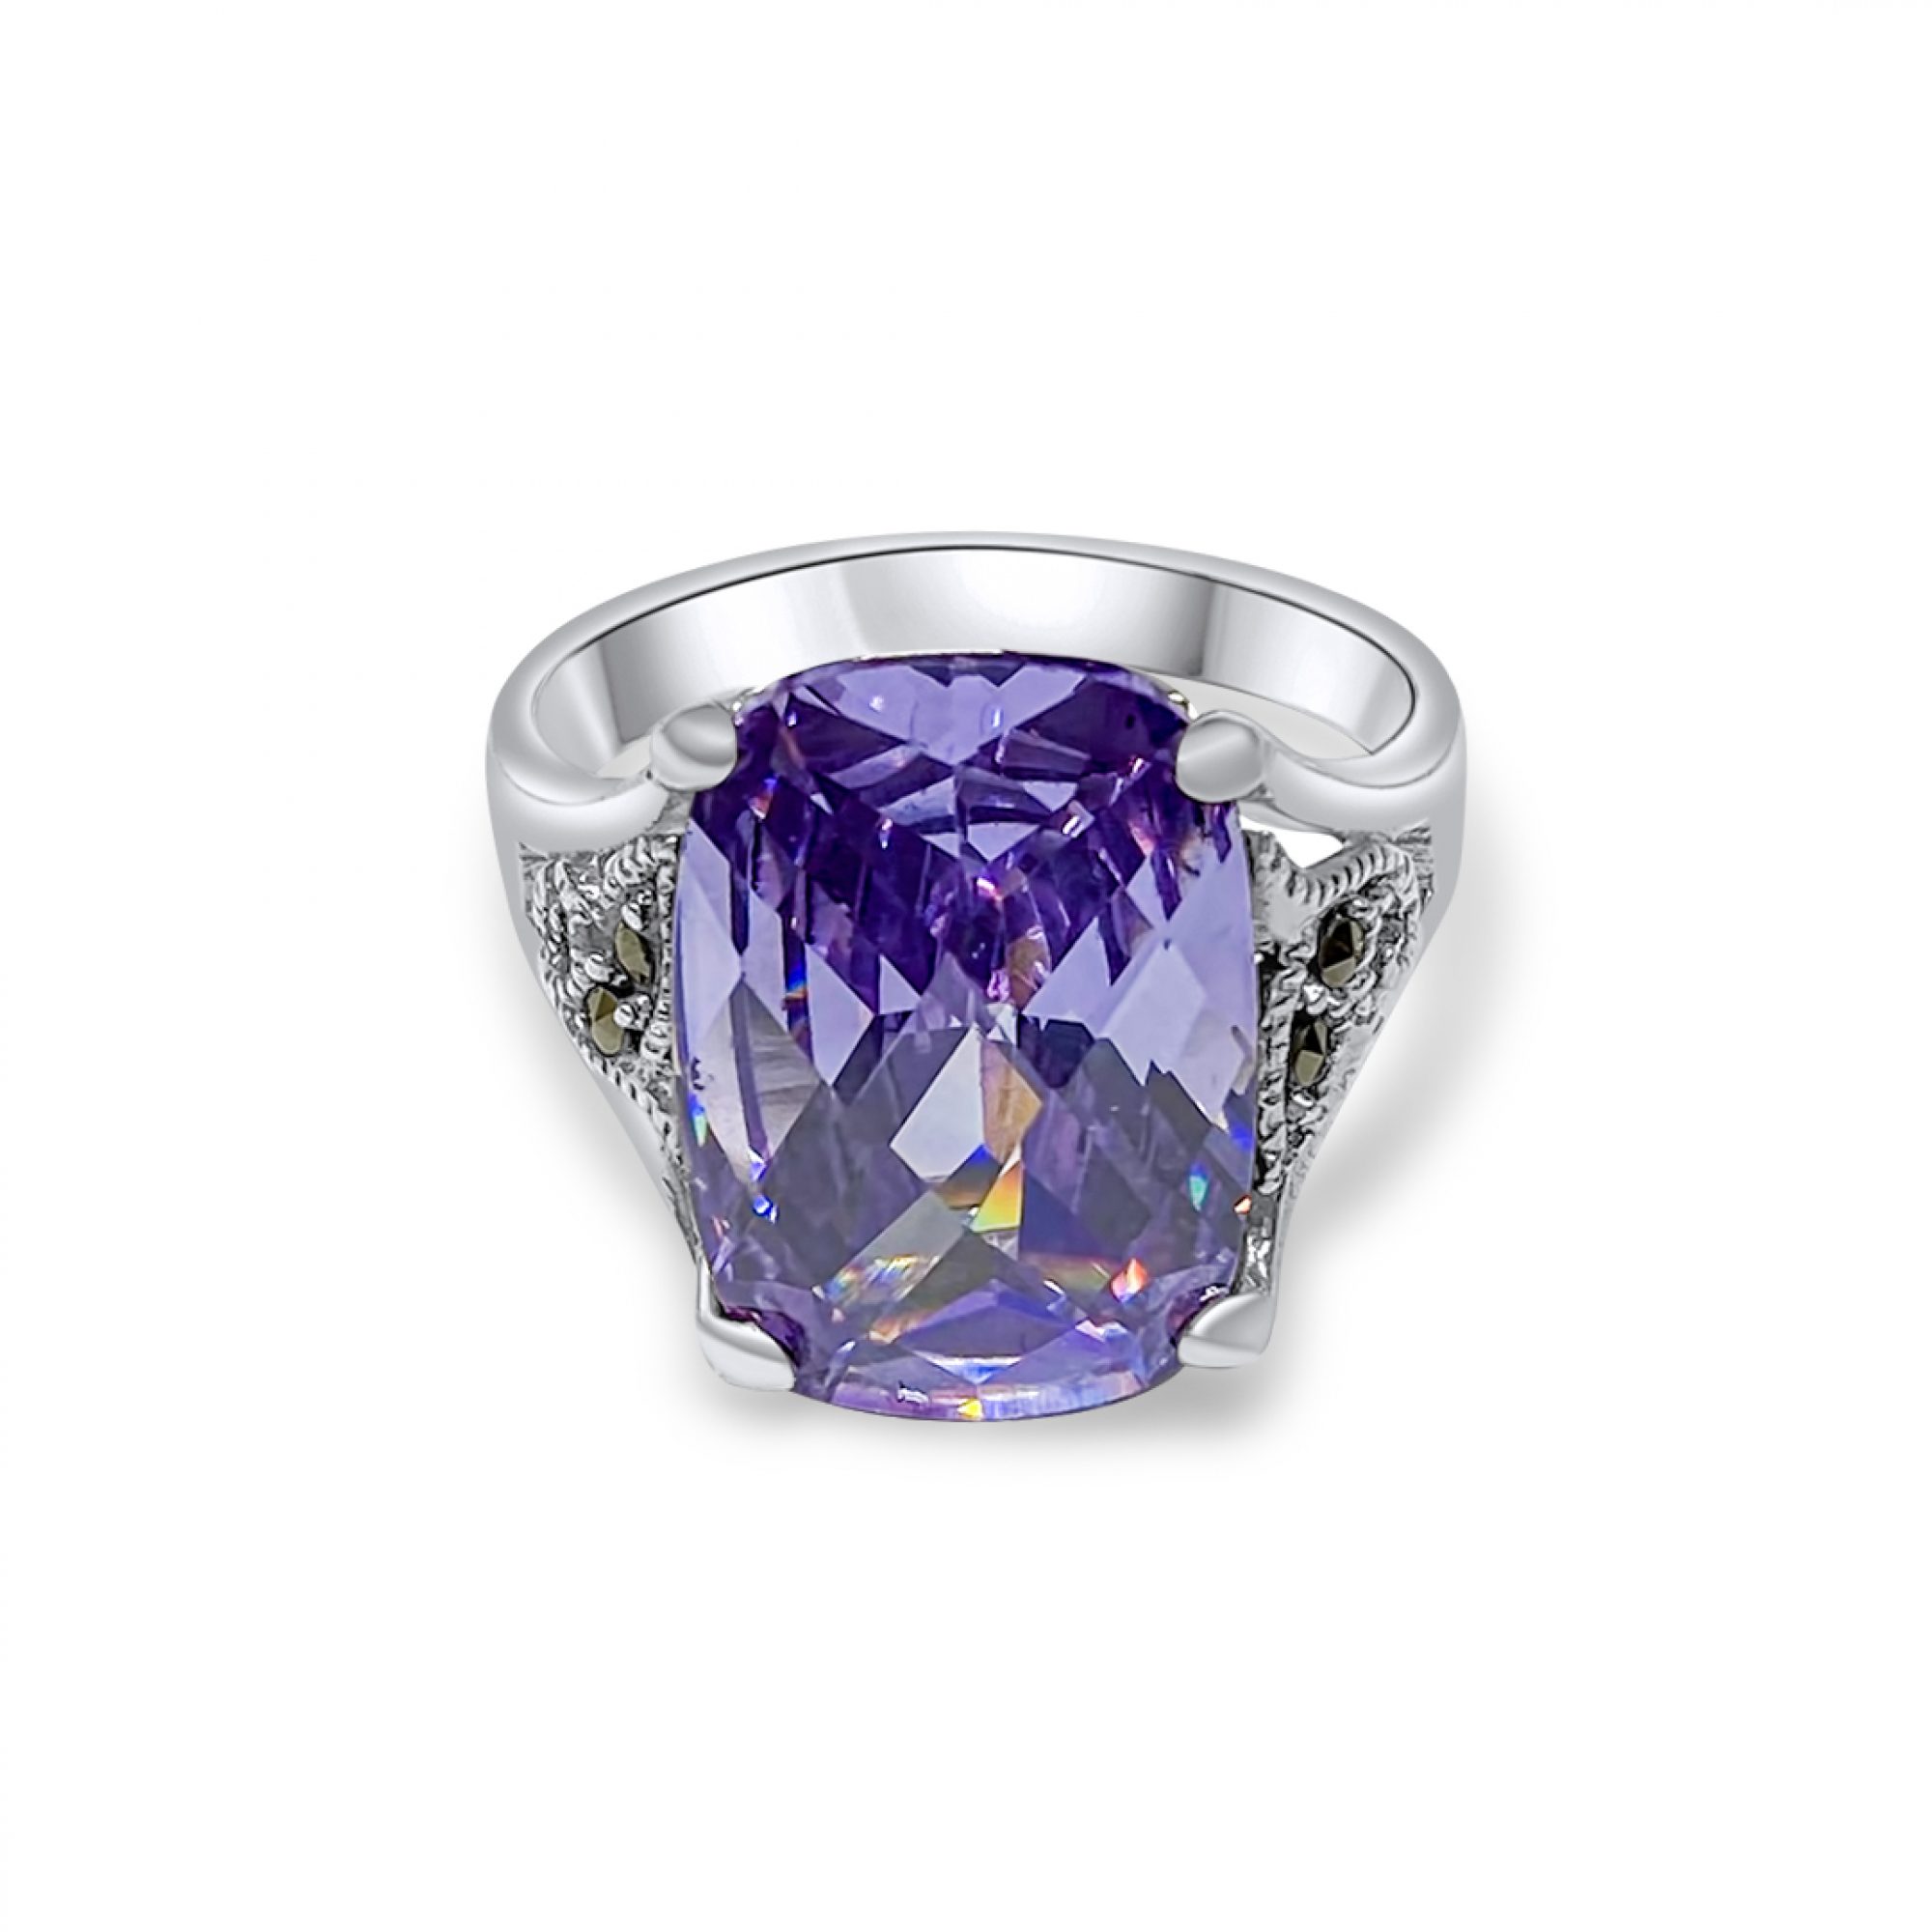 Ring with amethyst stone and marcasites